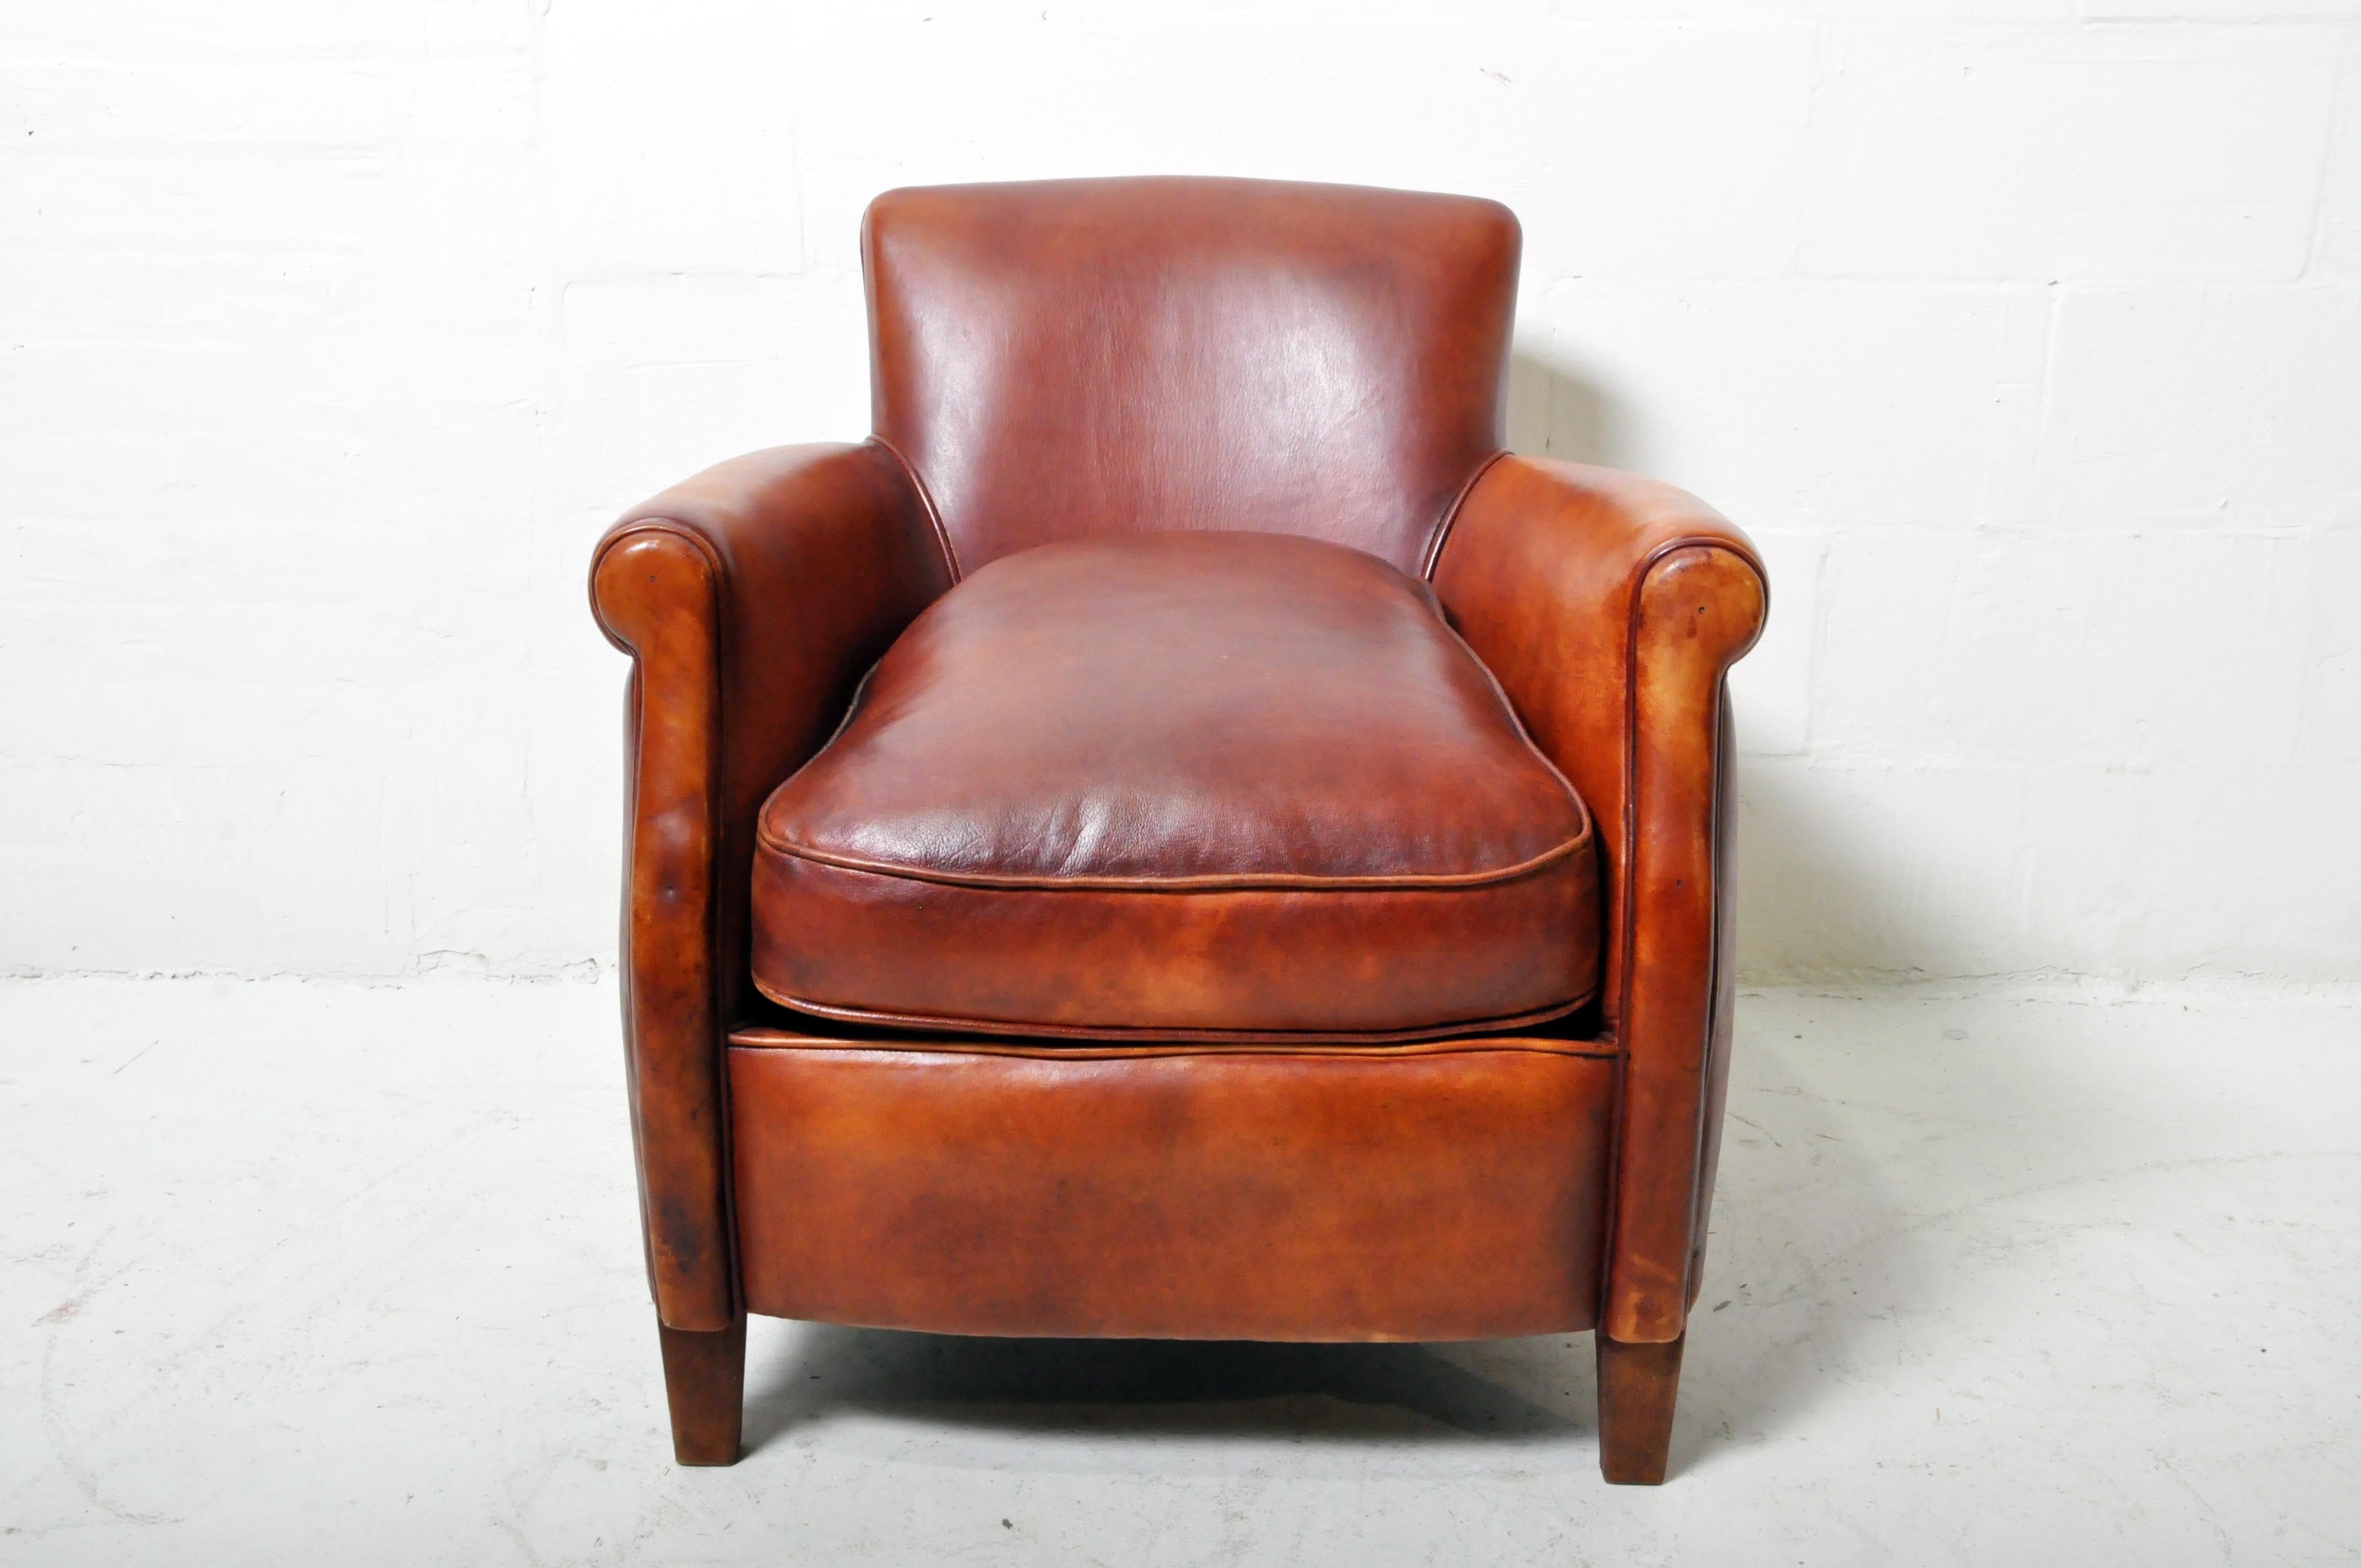 A petite French leather club chair in sheep skin. The design is Art Deco and is closely based on 1930's French classic designs.